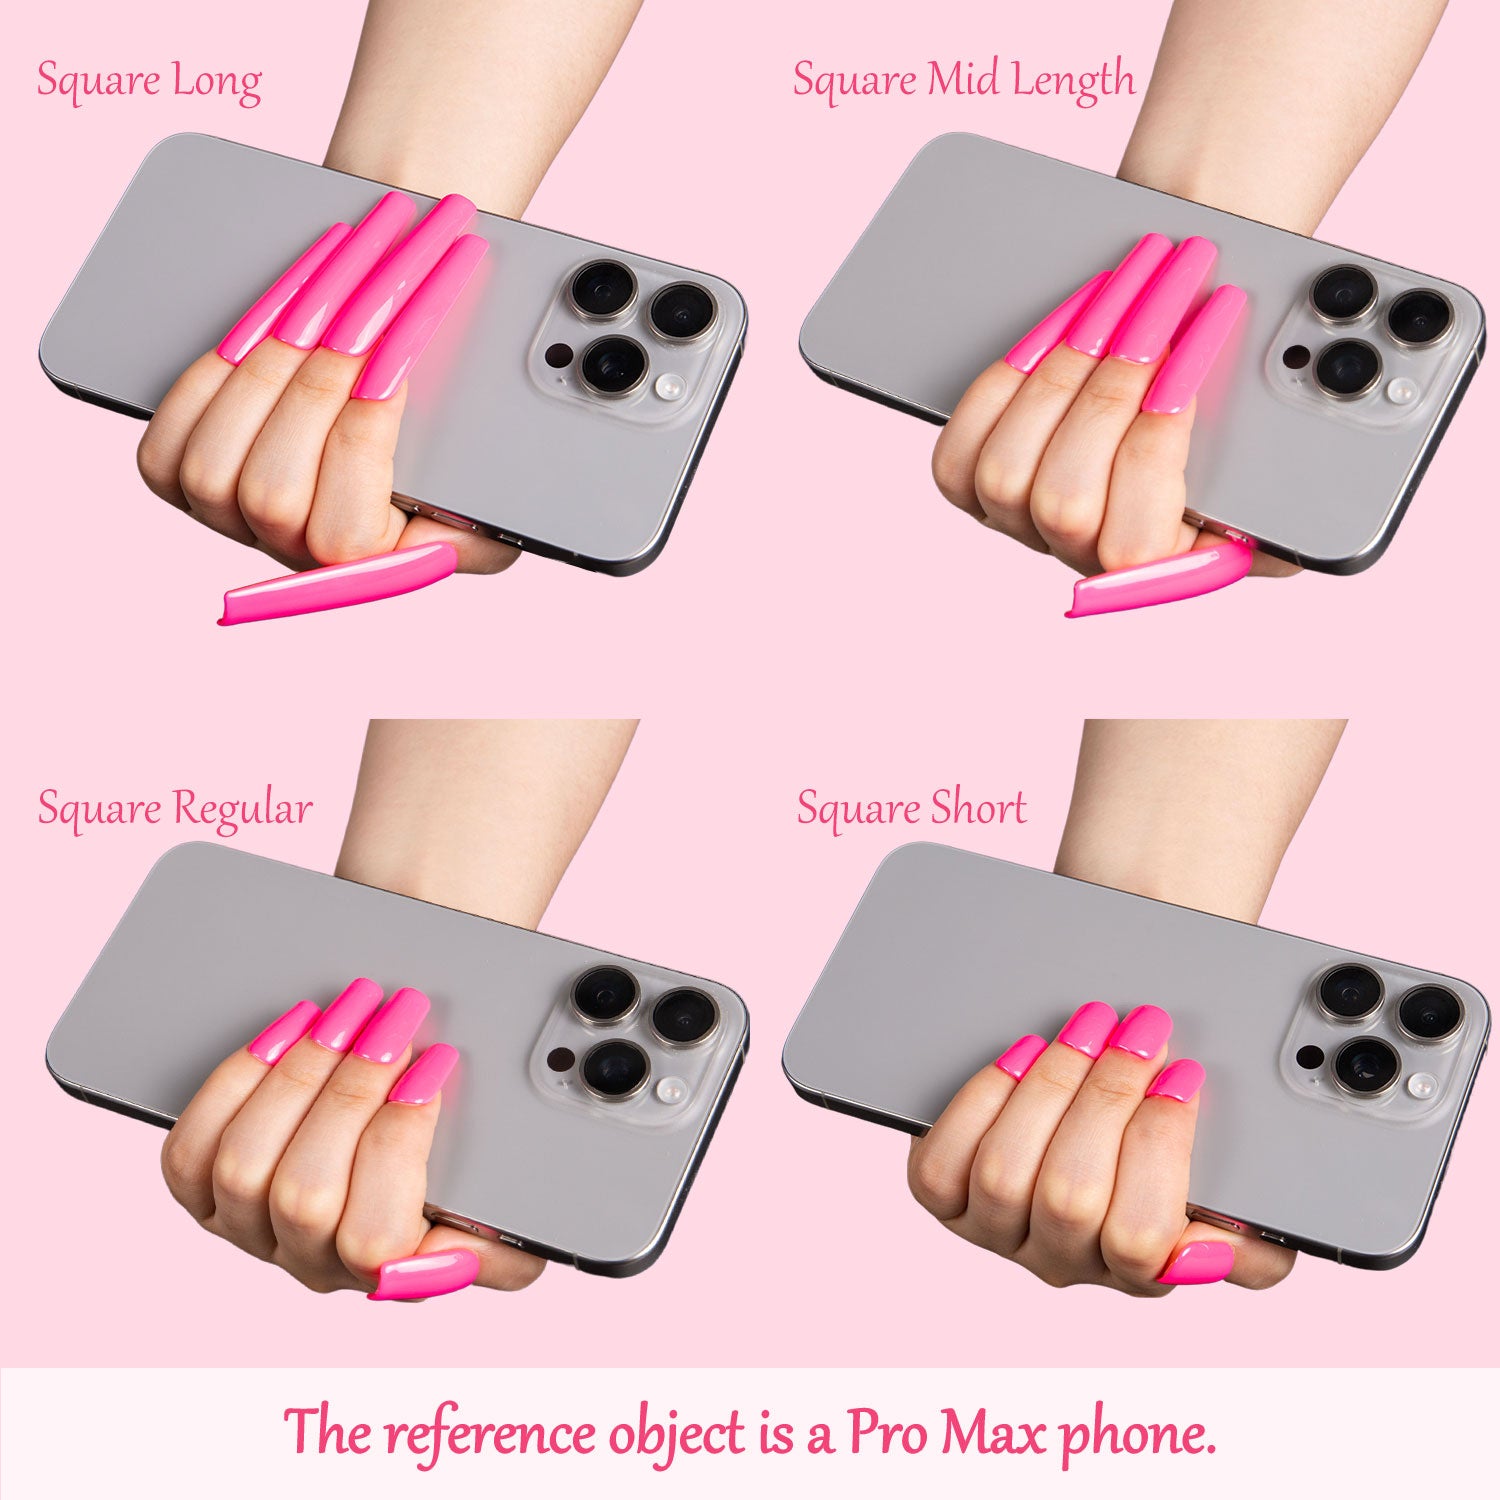 Comparison of four lengths of square-shaped press-on nails holding an iPhone Pro Max. Lengths include Square Long, Square Mid Length, Square Regular, and Square Short. Reference object is a Pro Max phone.